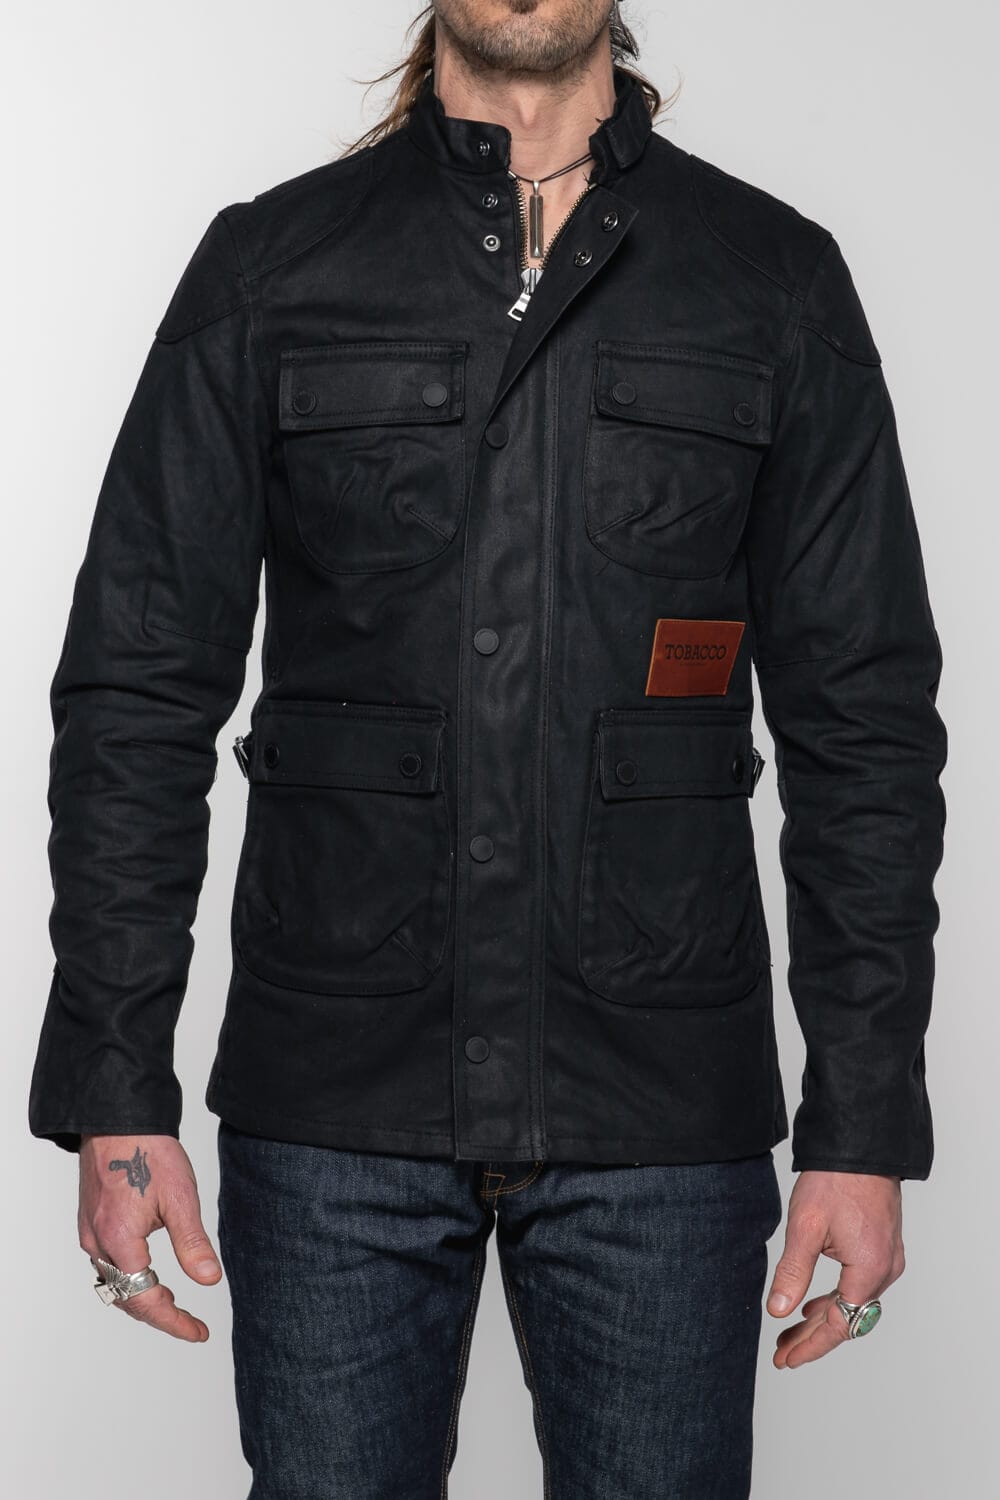 The McCoy Waxed Canvas Protective Jacket - Black. Pockets for D3O